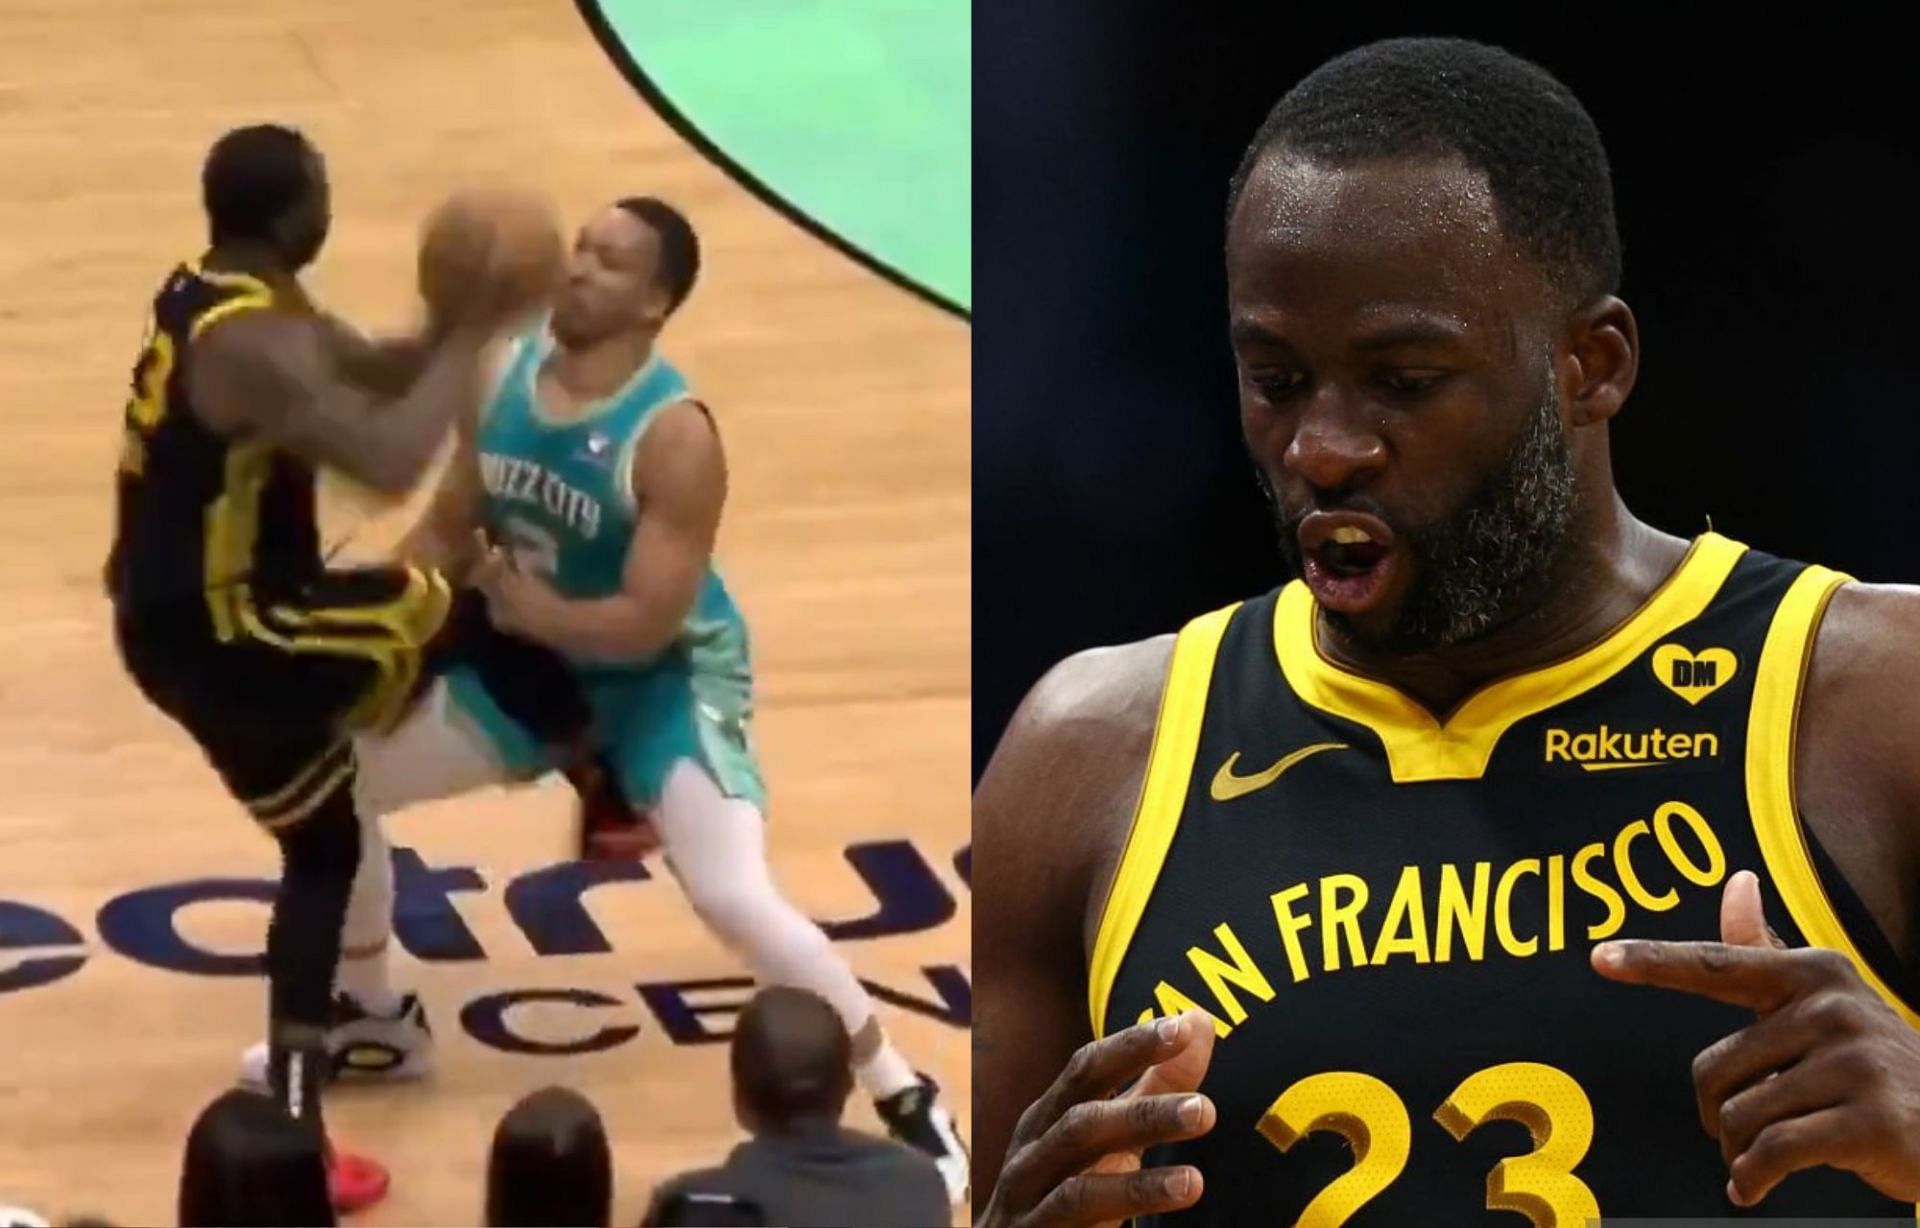 Draymond Green got called with a regular foul as he almost kicked Grant Williams in the groin area